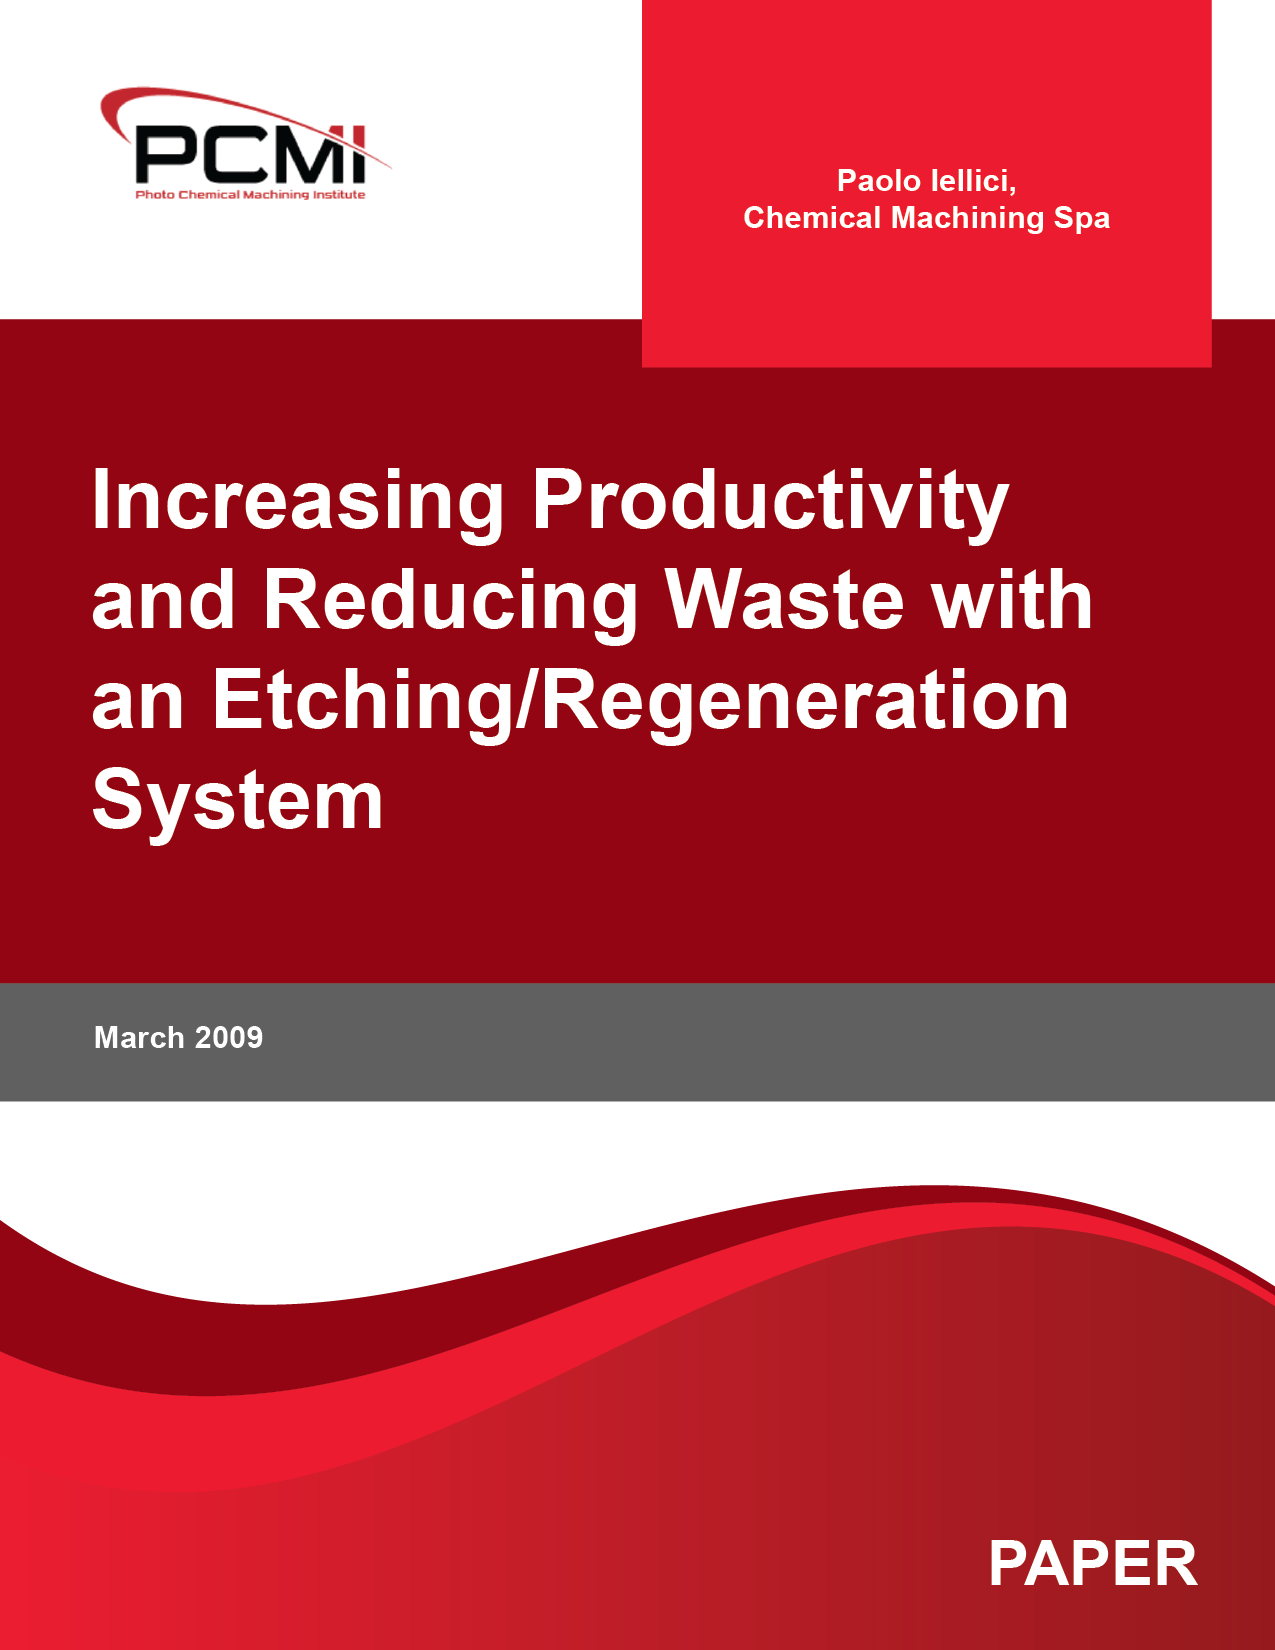 Increasing Productivity and Reducing Waste with an Etching/Regeneration System